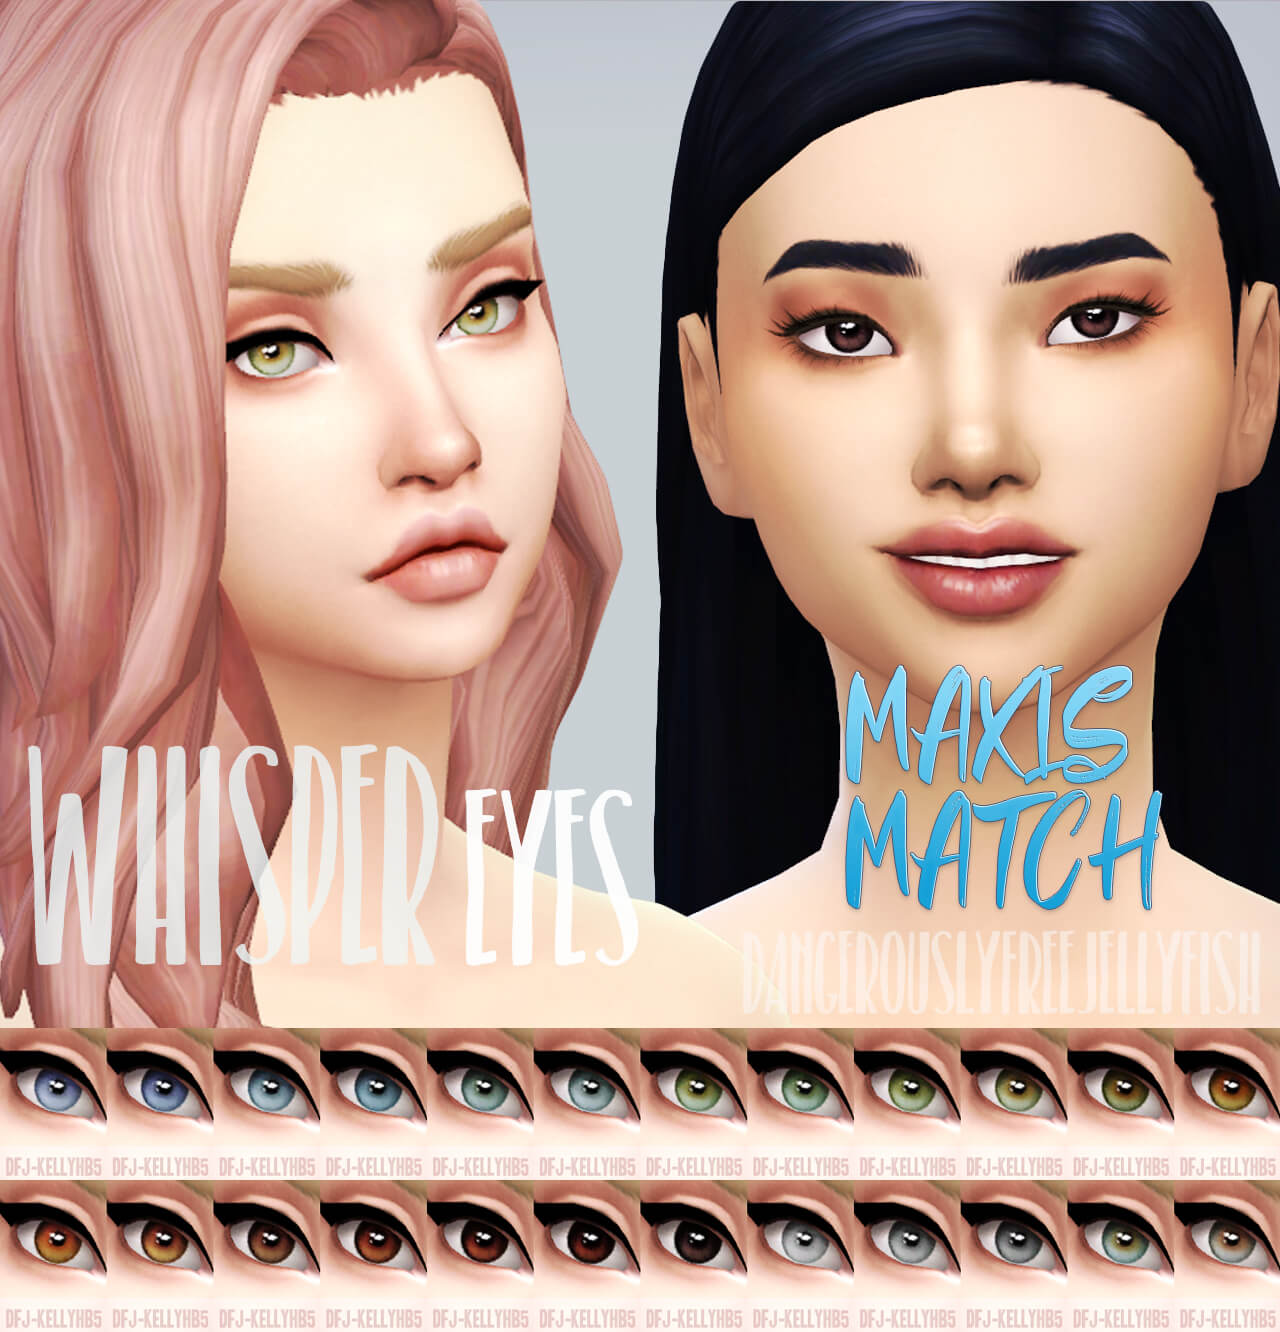 sims 4 eyes maxis match